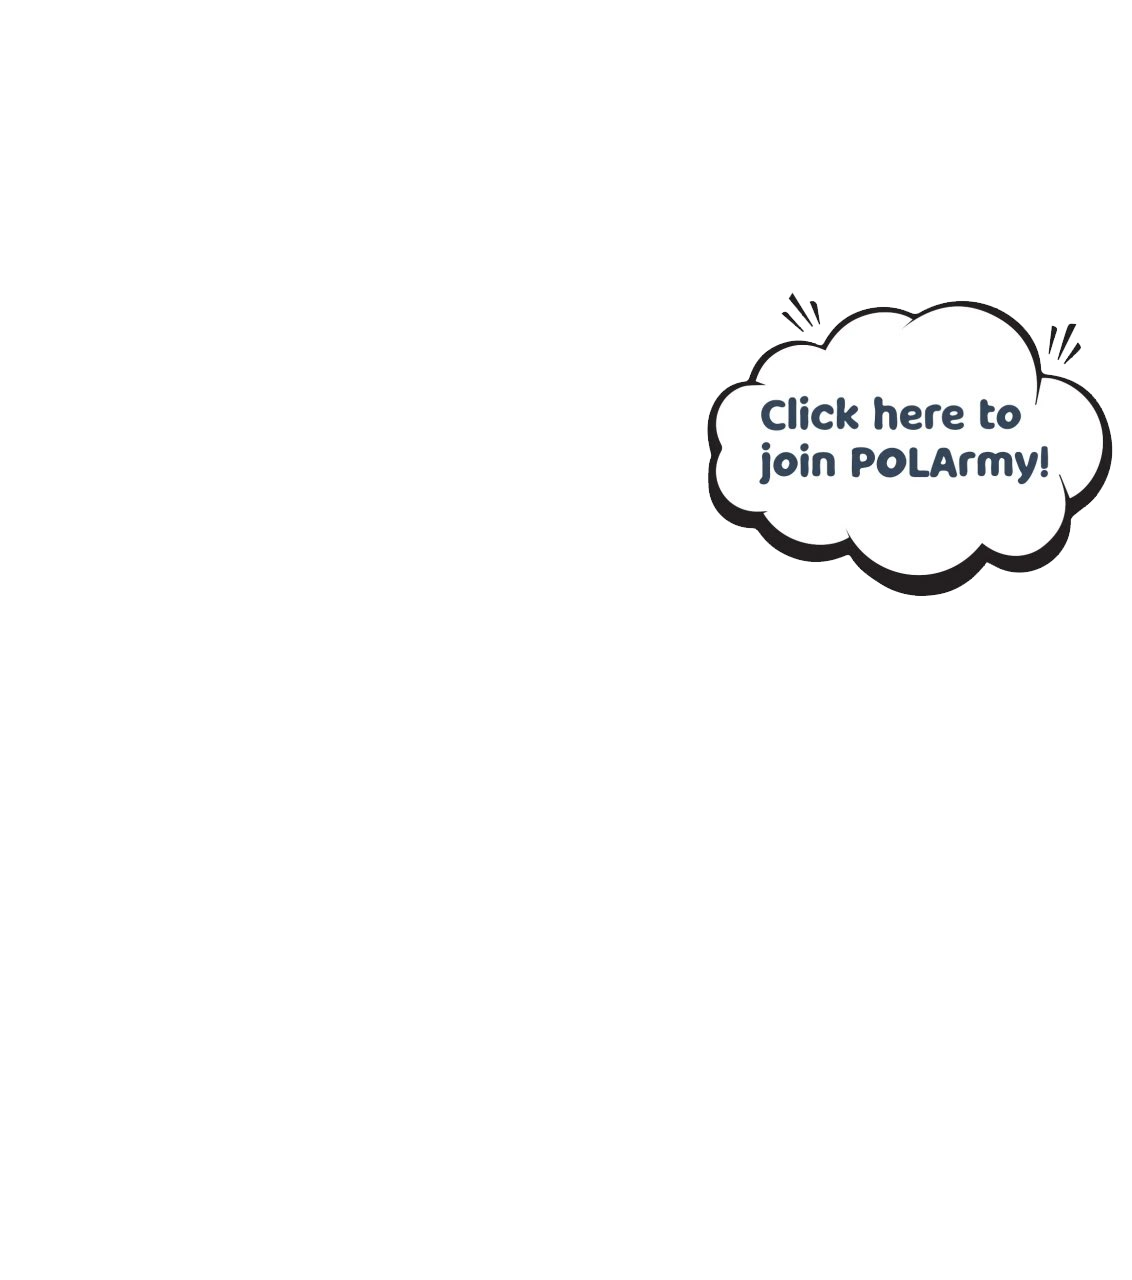 click to join polarmy